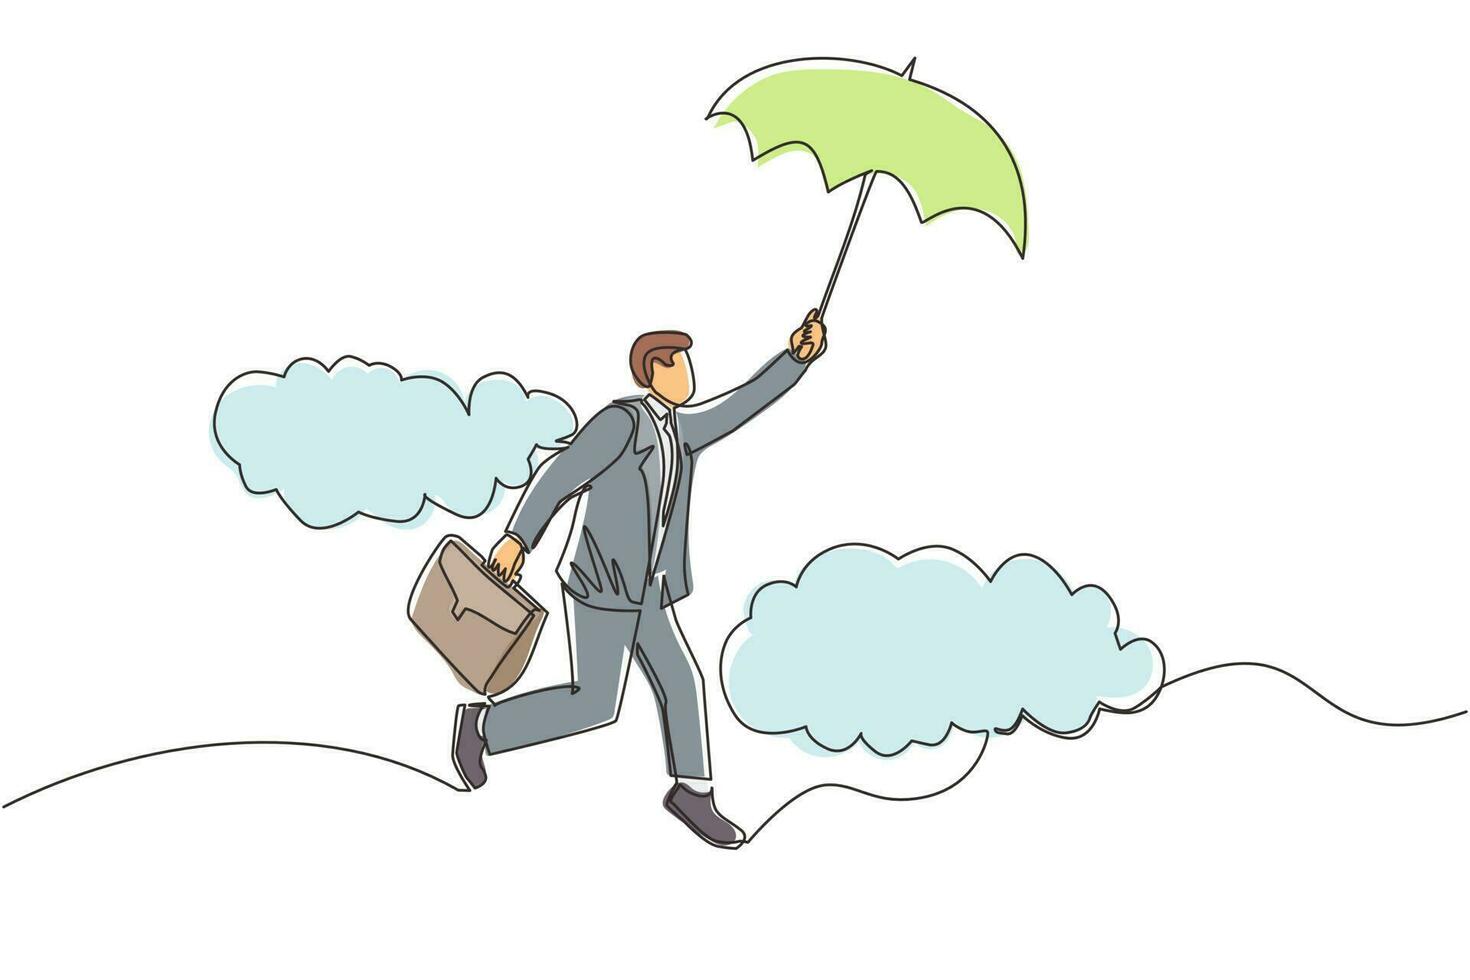 Single one line drawing happy wealthy businessman flying with his umbrella holding briefcase. Office worker achieve financial independence. Continuous line draw design graphic vector illustration